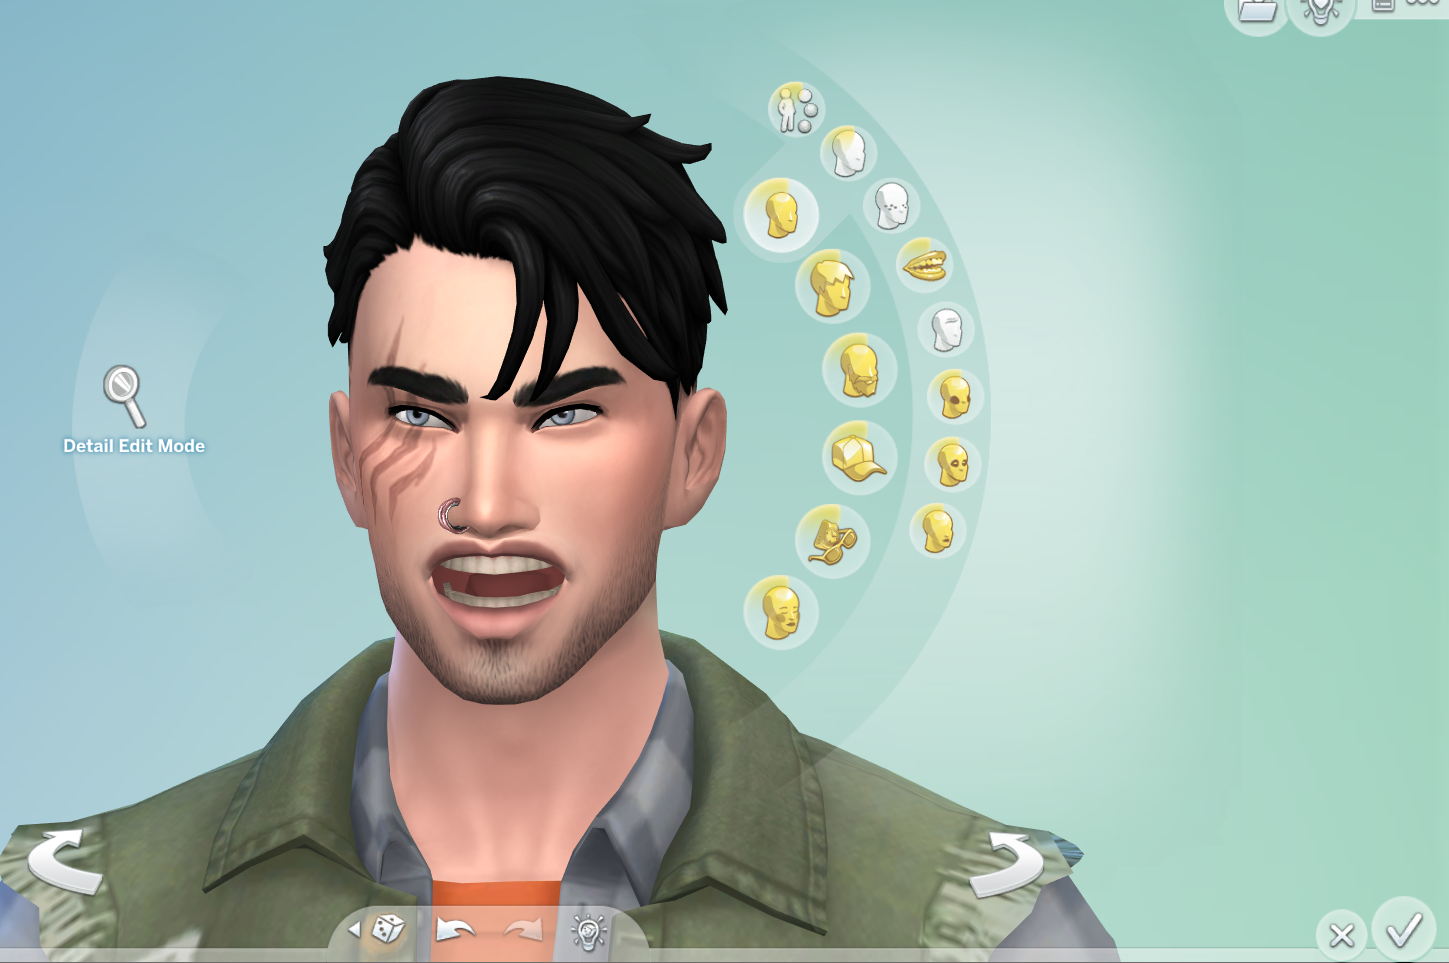 Certain Cas Categories For Werewolves Disappear When Clicked The Sims 4 Technical Support